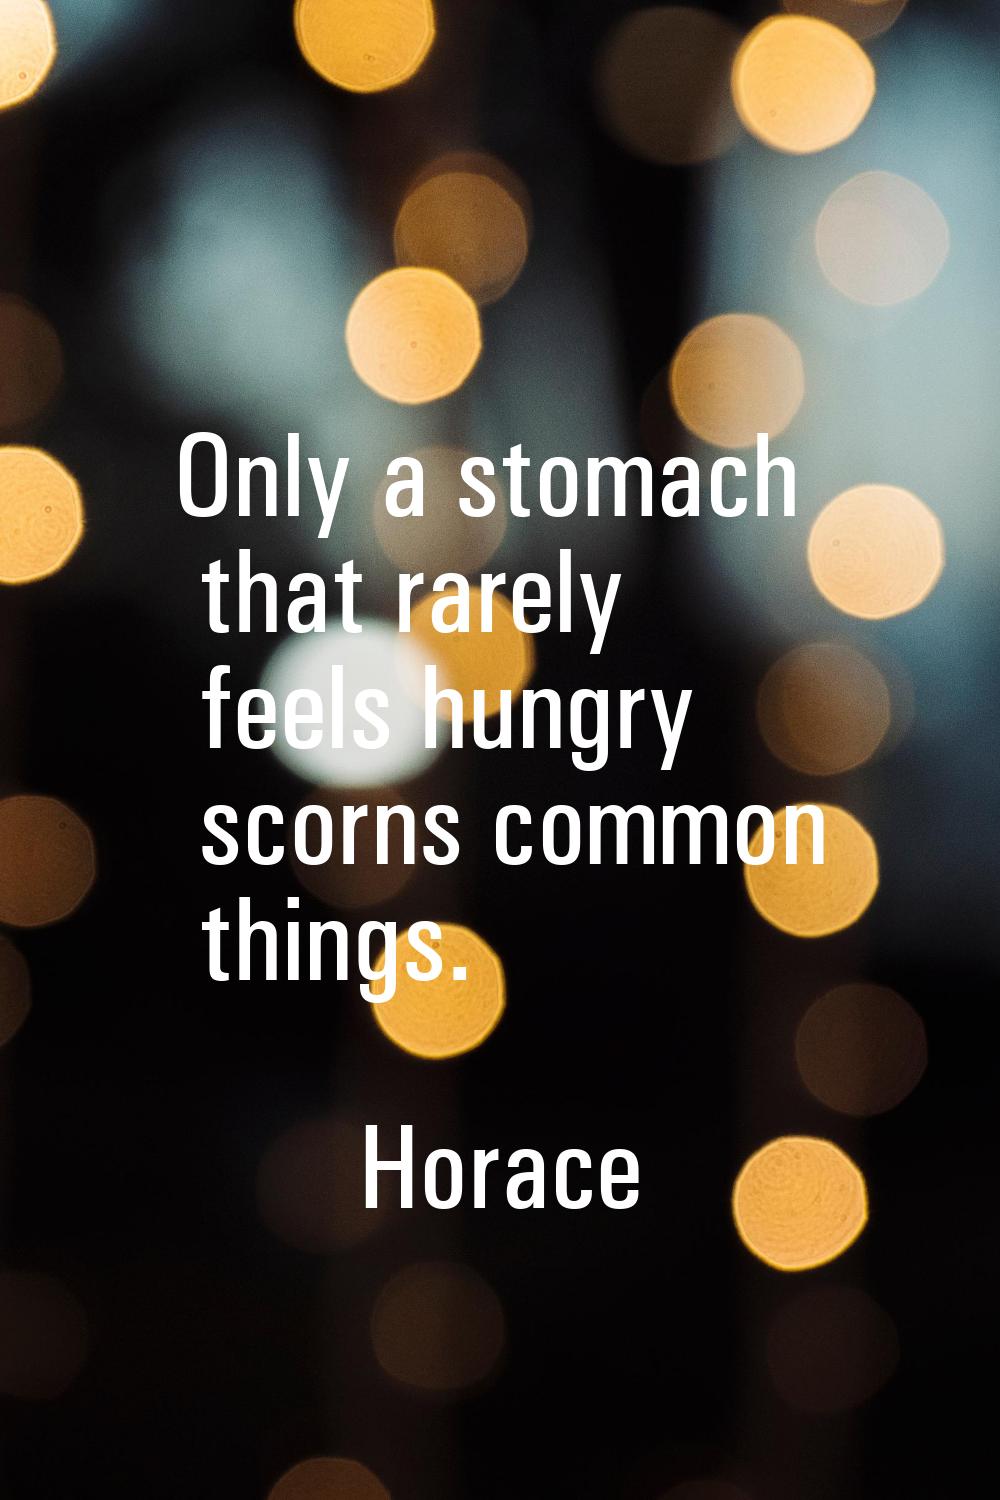 Only a stomach that rarely feels hungry scorns common things.